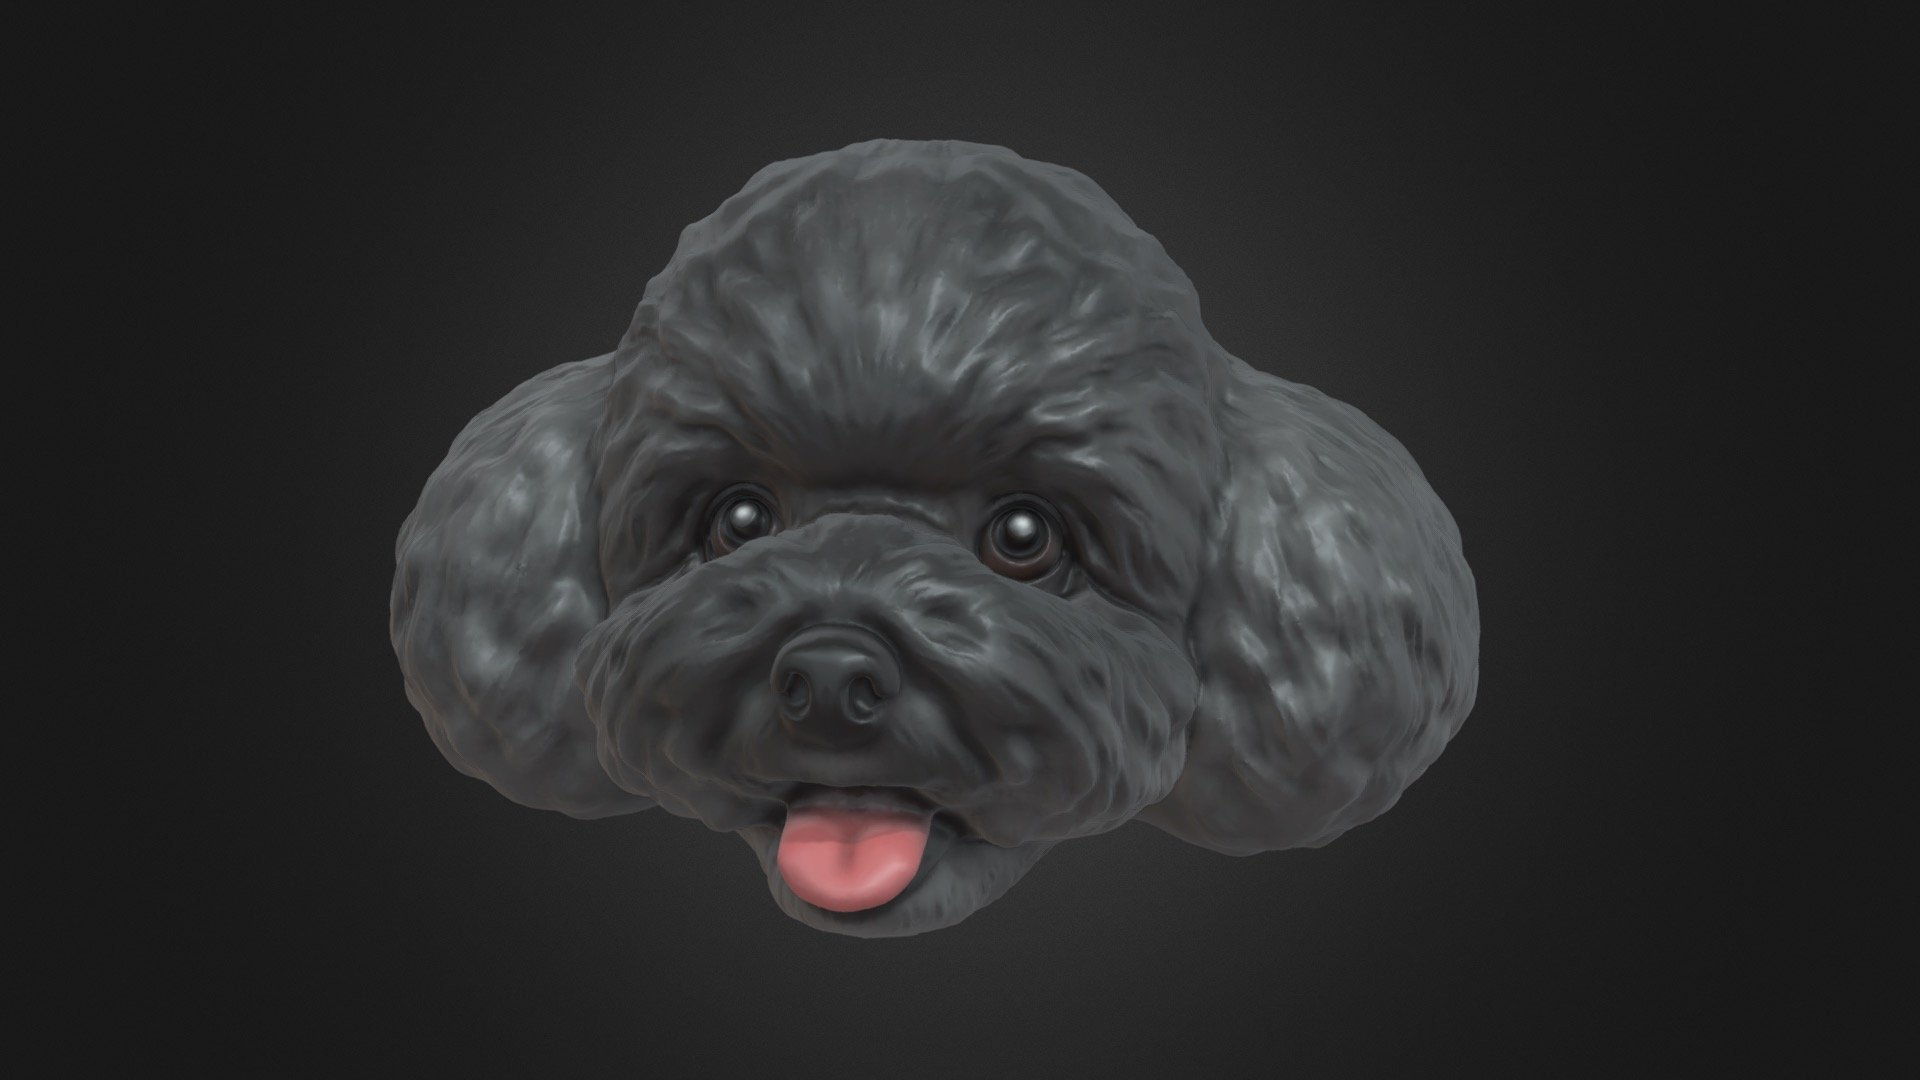 Seed by mi custom made Poodle model.

Interested to order custom made jewellery (e.g. Ring, Necklace, Earrings, Bracelet, Brooch, Magnet, Hair clips, Cufflinks etc.)?  Please visit our online store, facebook page or instagram 3d model